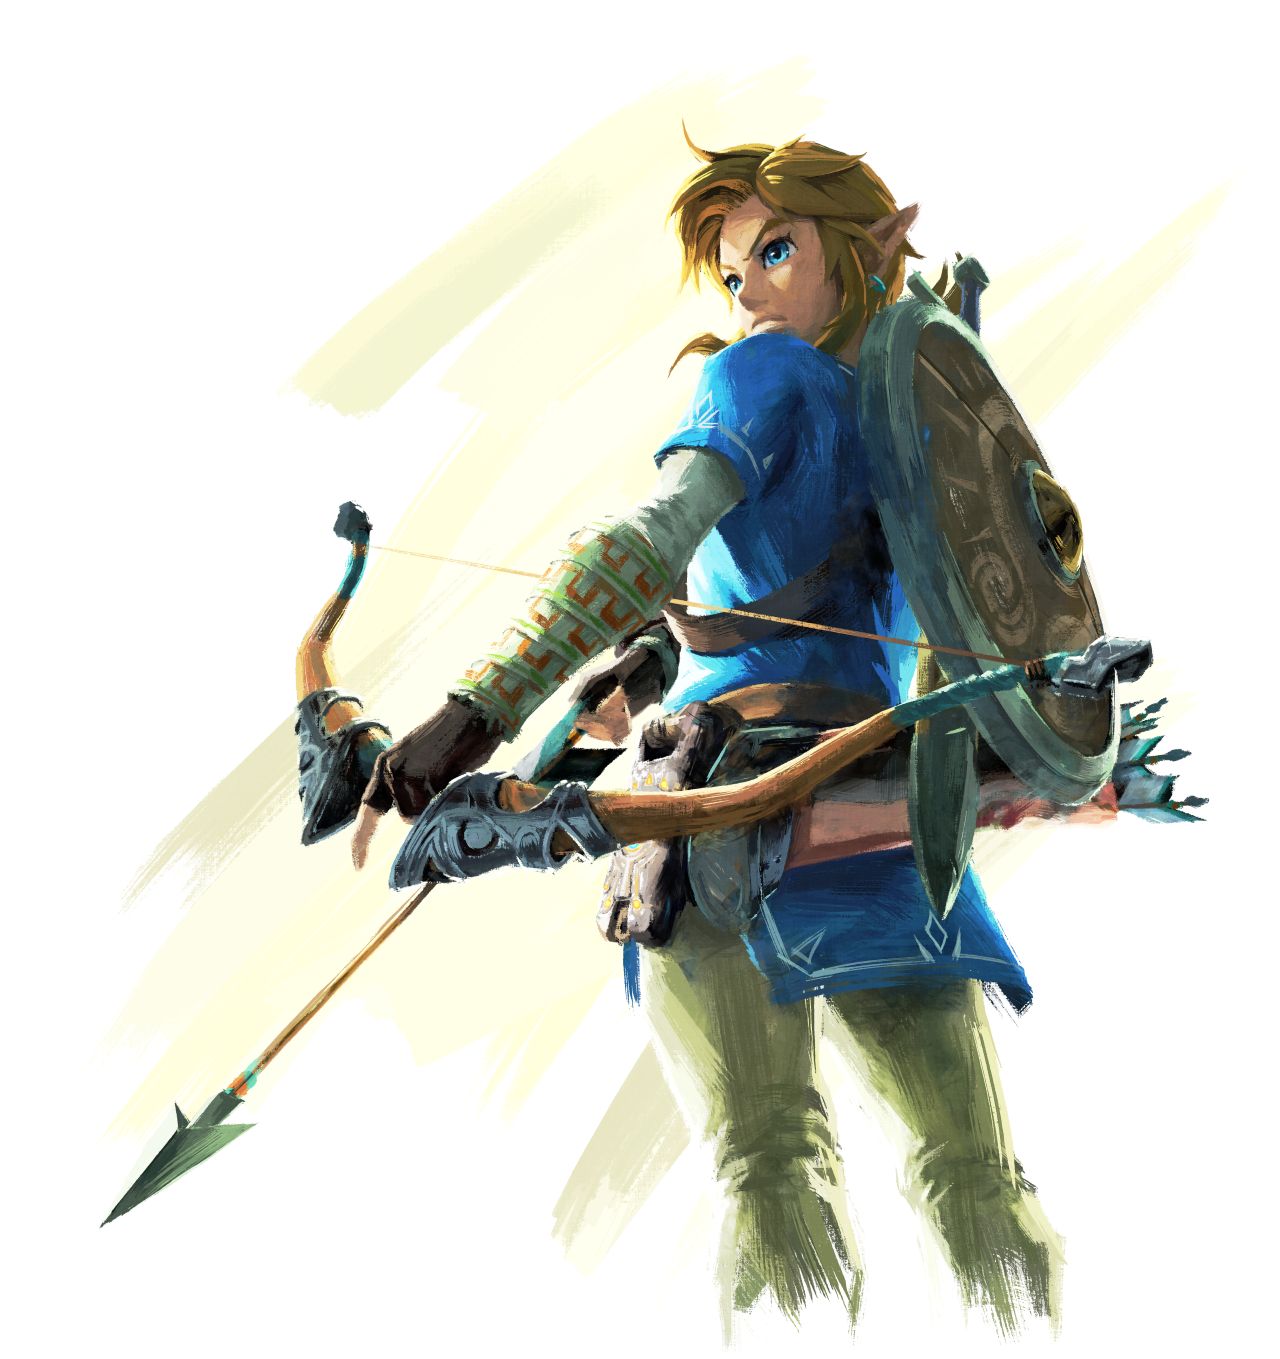 Image for Here's more Zelda: Breath of the Wild footage fresh from The Game Awards